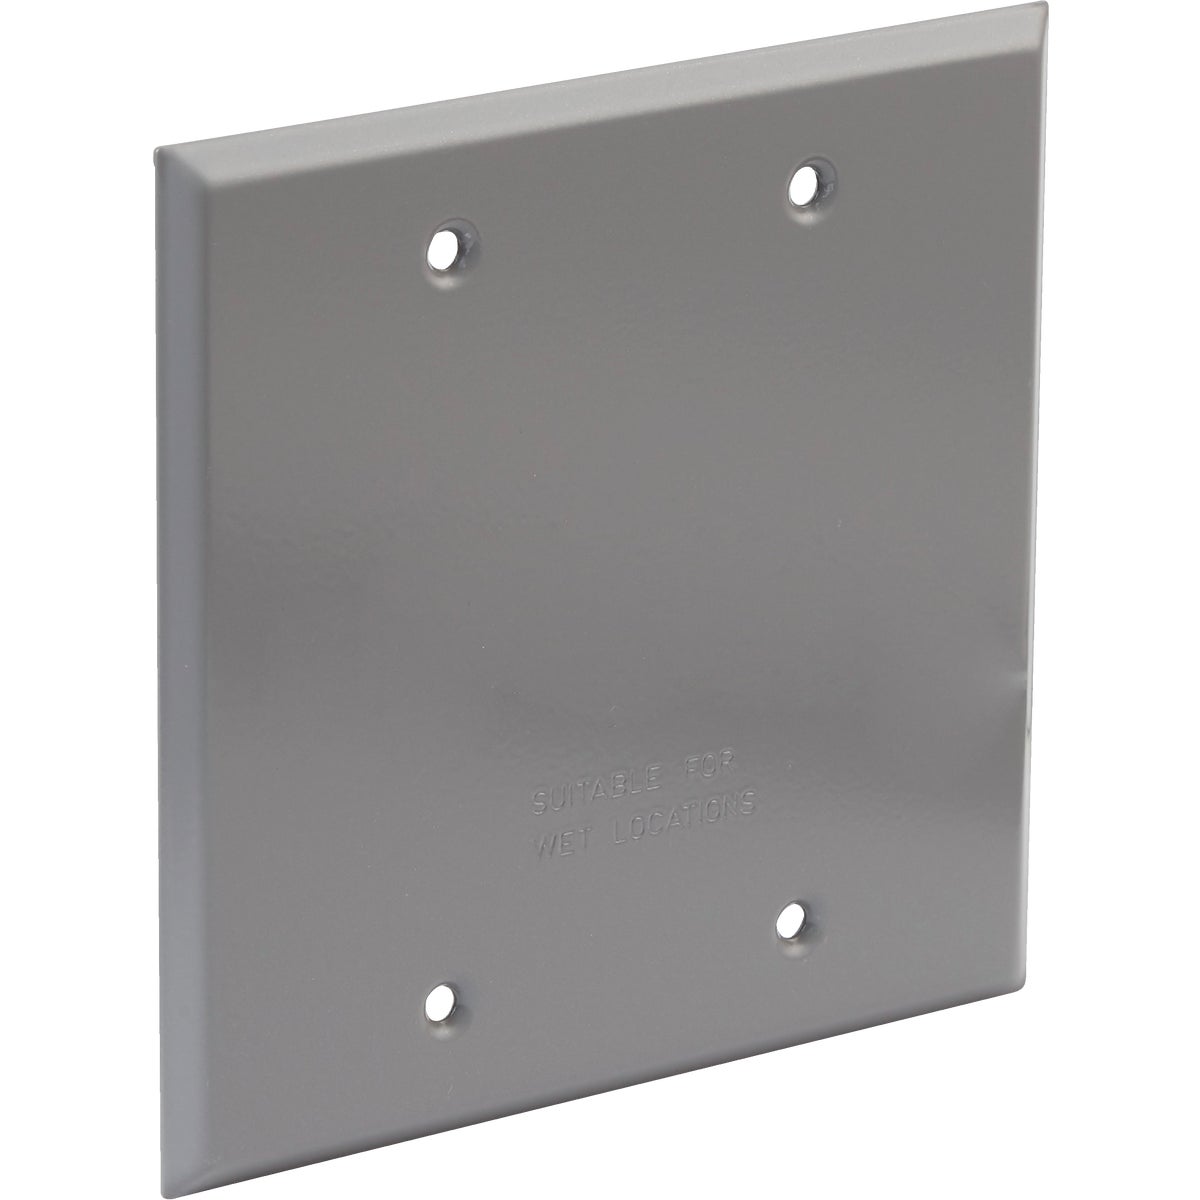 Item 535893, 2-gang blank cover, vertical or horizontal mounting.